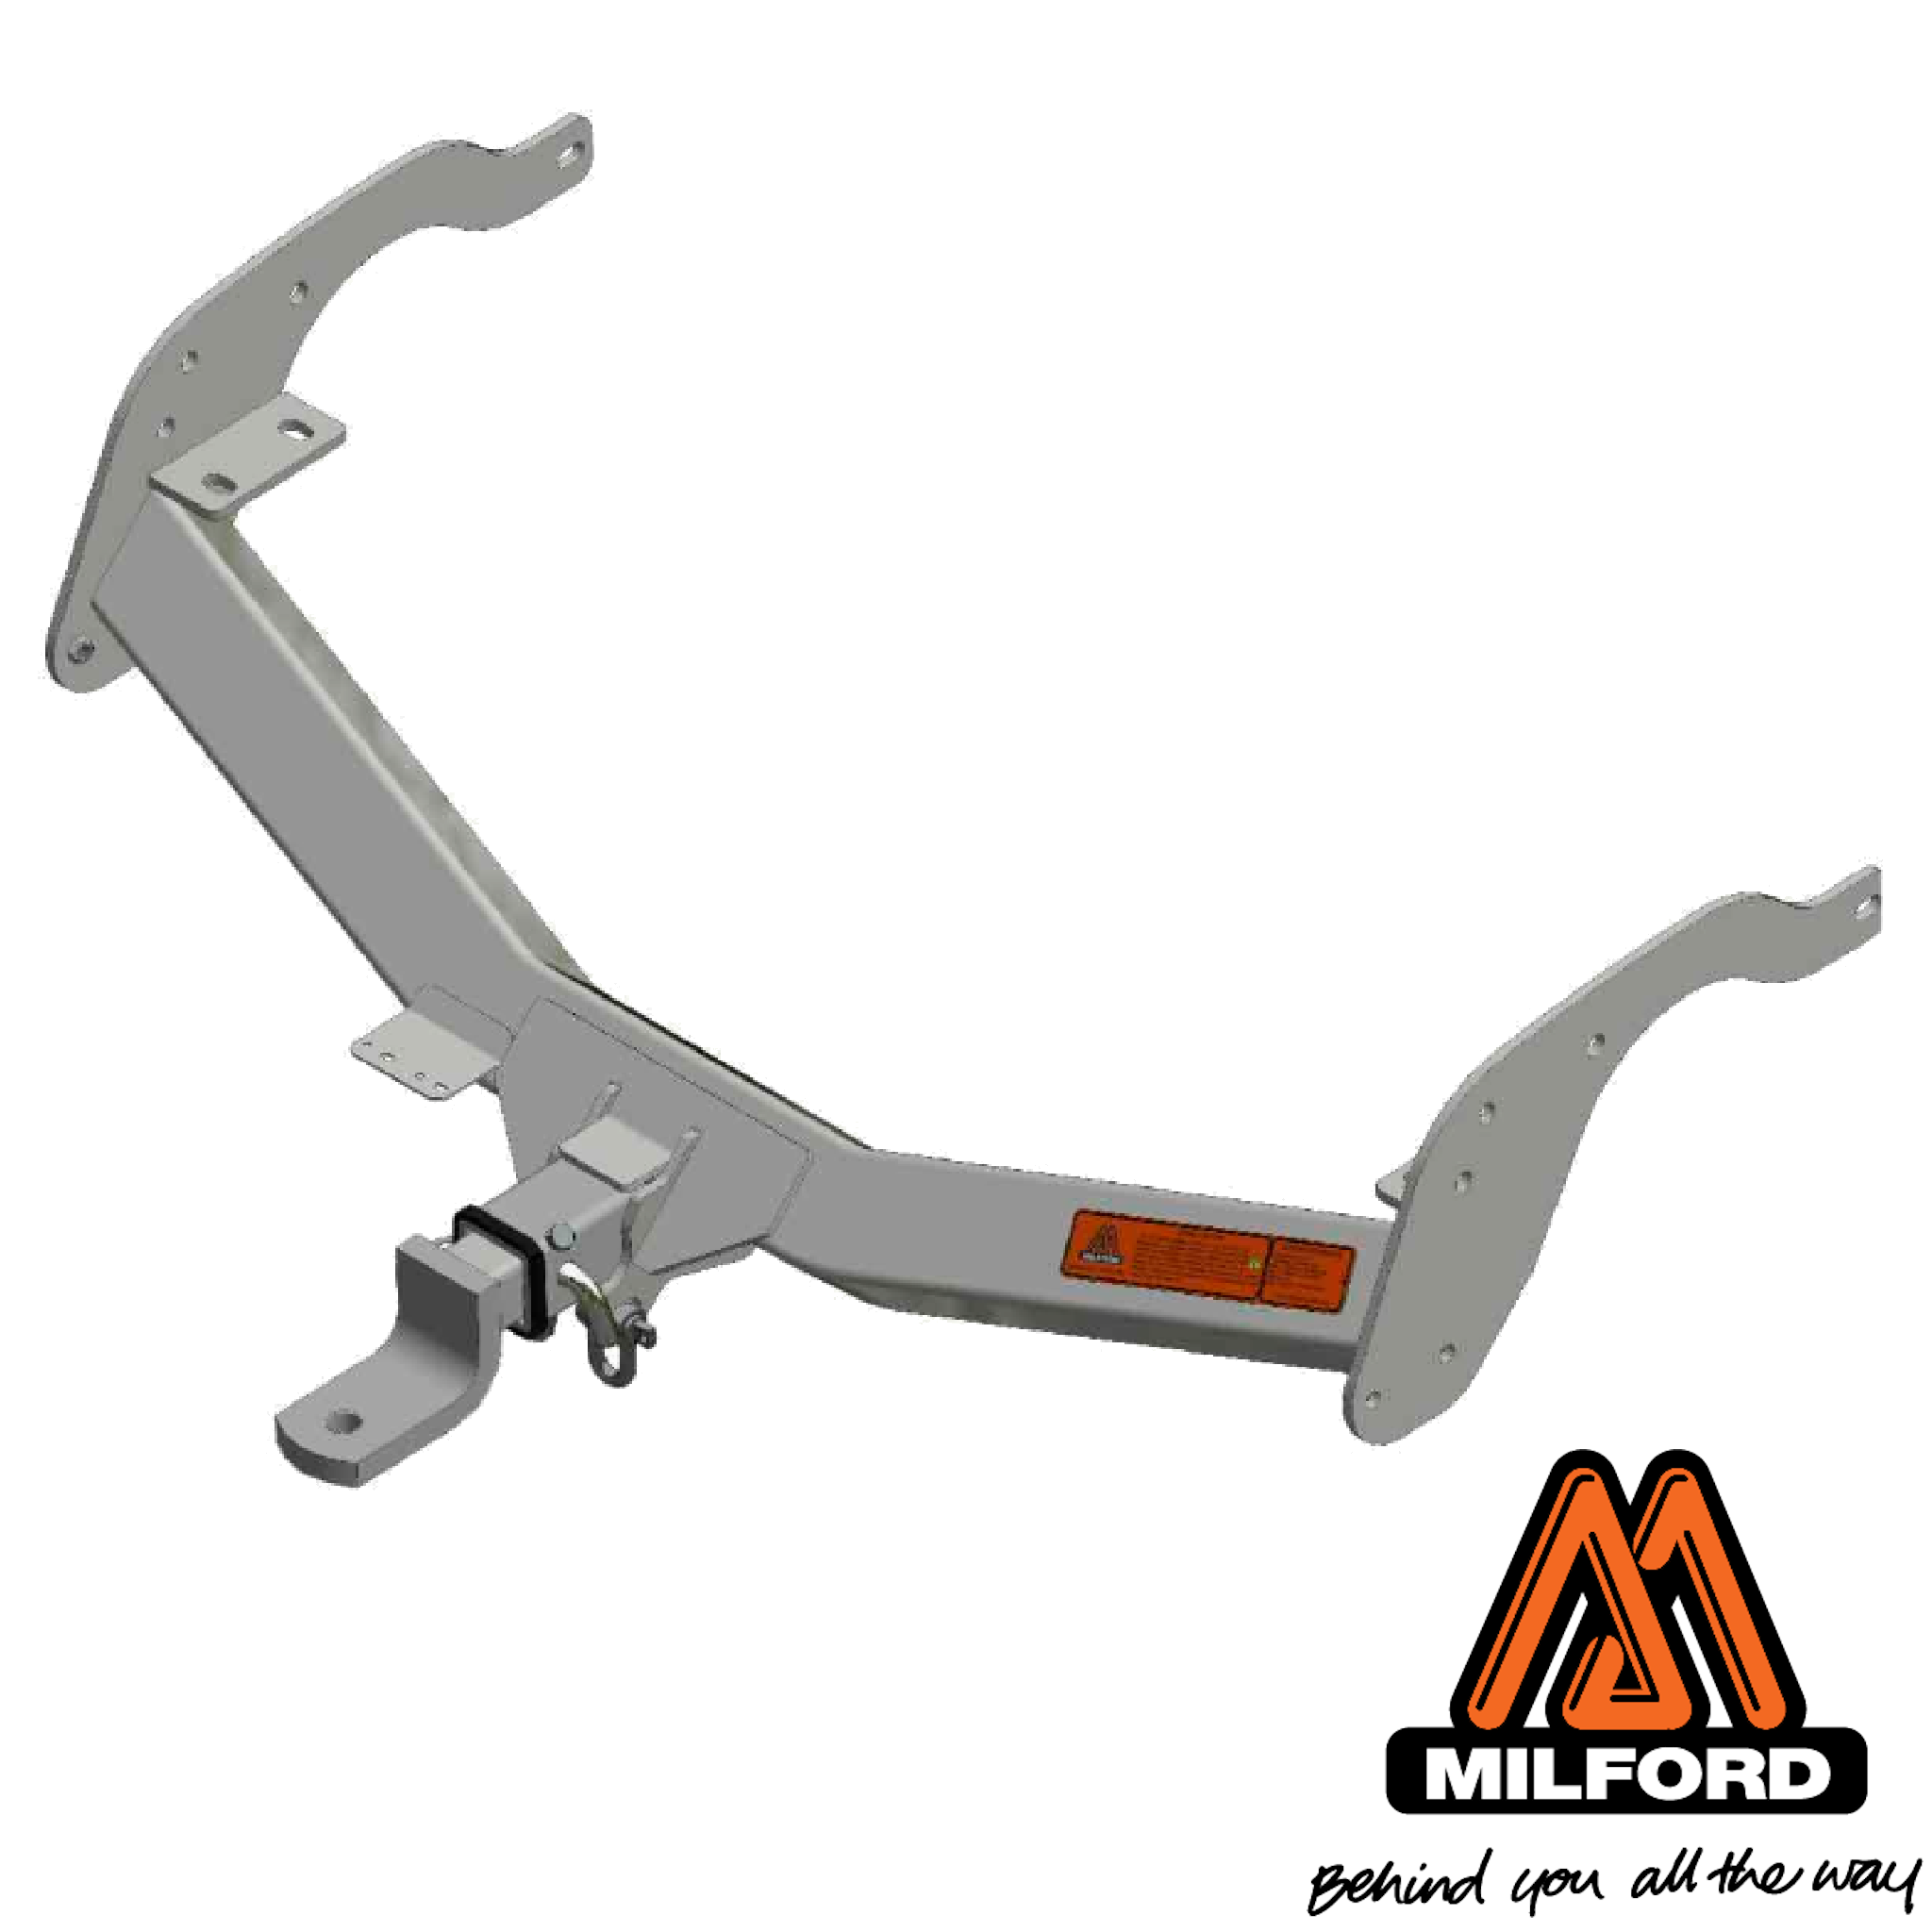 Ford Ranger 2wd & 4wd Tub Body With Bumper 08/2015 - 04/2022 (CAN-BUS Harness) (Oversize Spare) - Towbar Kit - UNIQUE PLUS